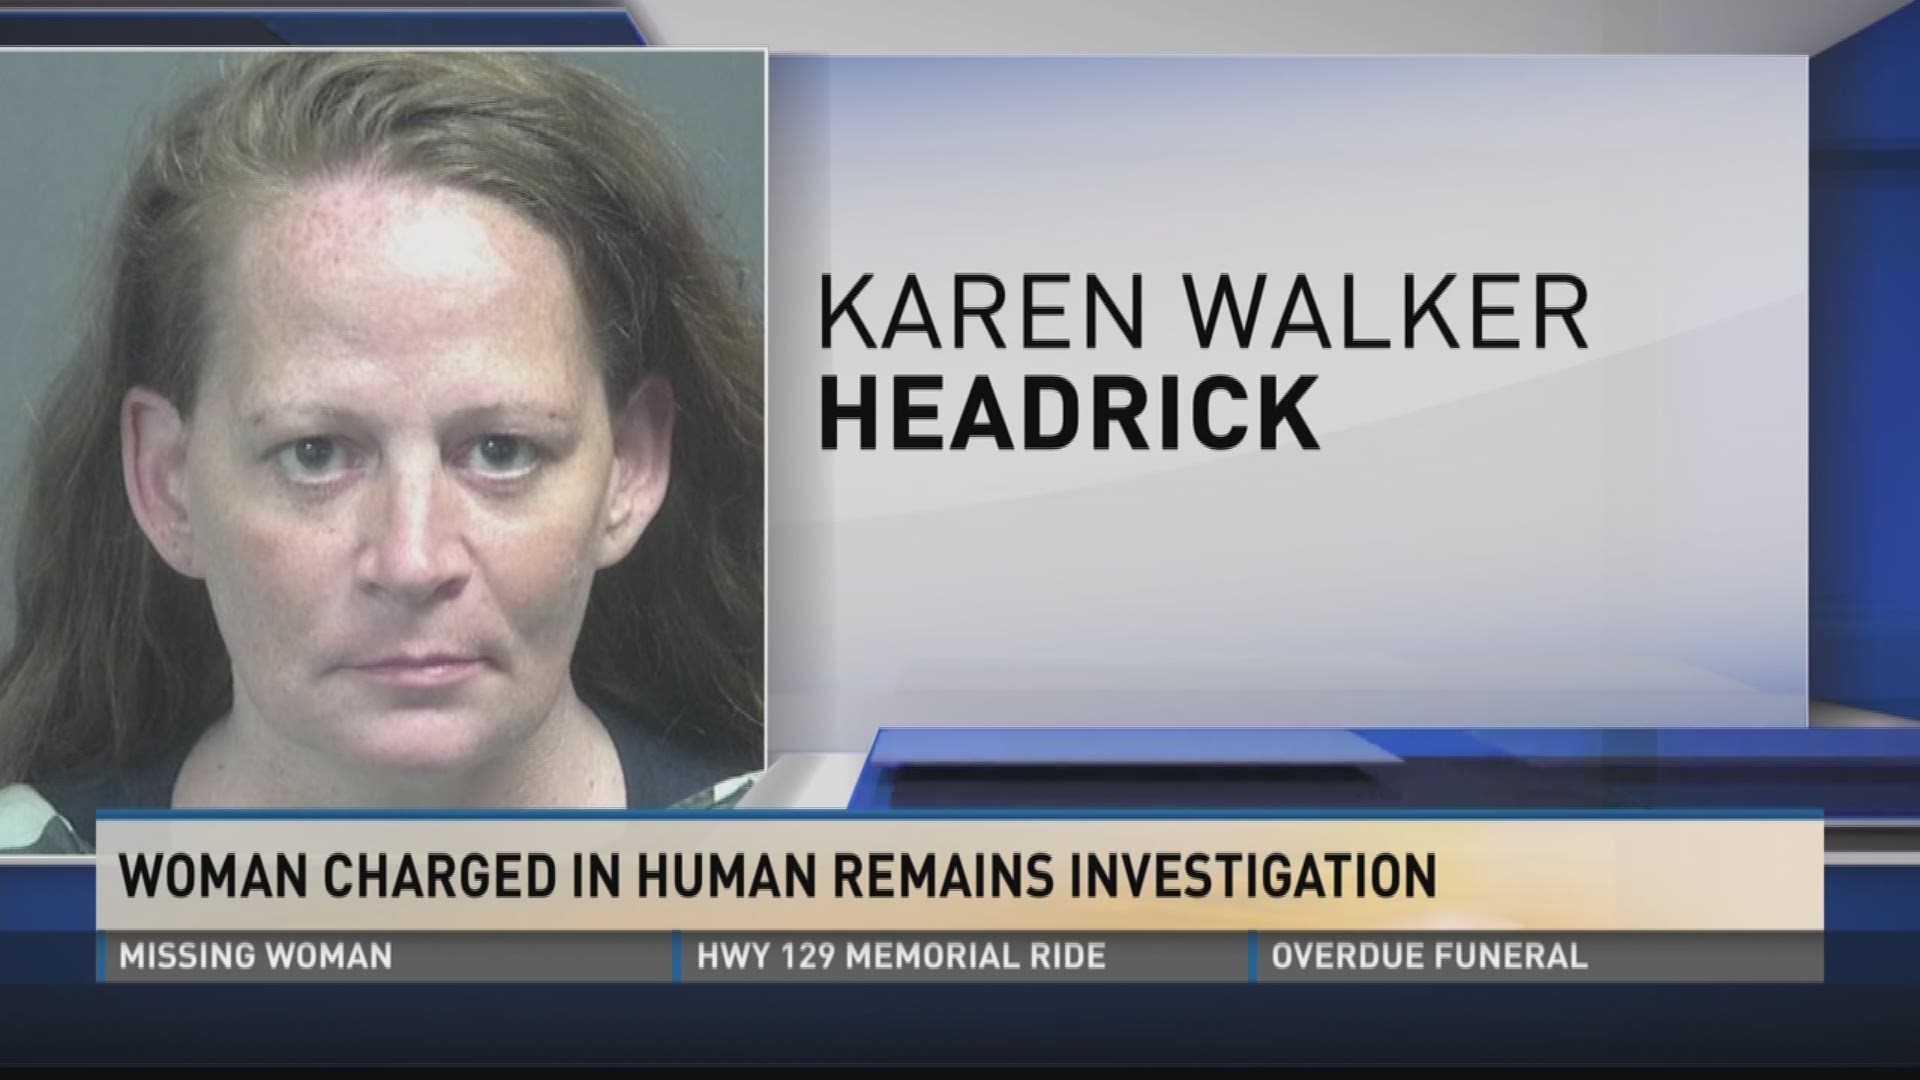 Blount County authorities arrested 47-year-old Karen Headrick in connection with unidentified remains found on her property off Butterfly Gap Loop.